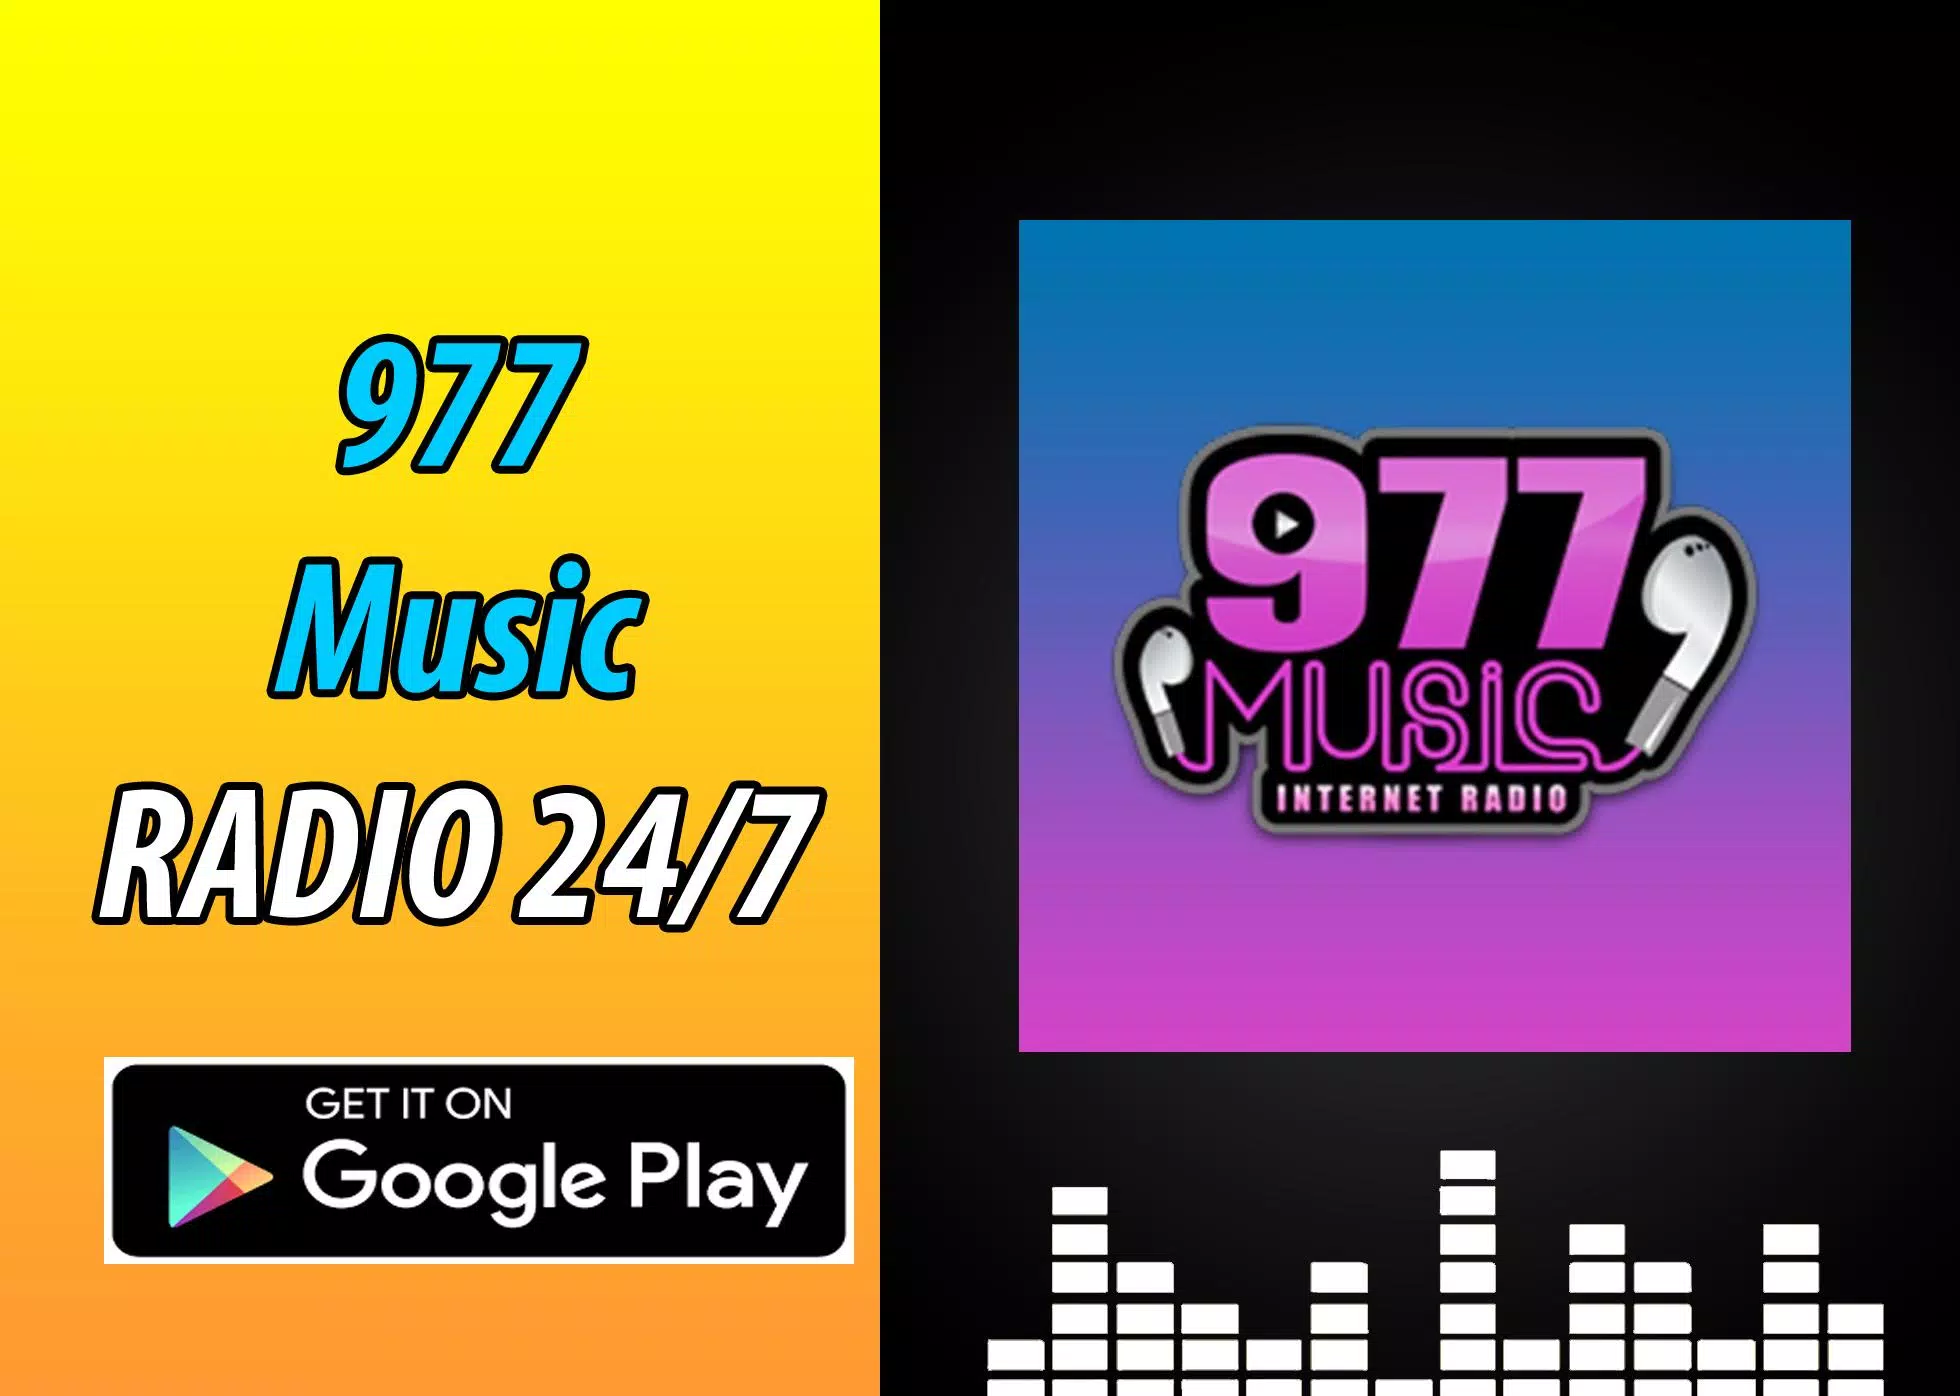 977 Today's Hits Live 24/7 for Android - APK Download